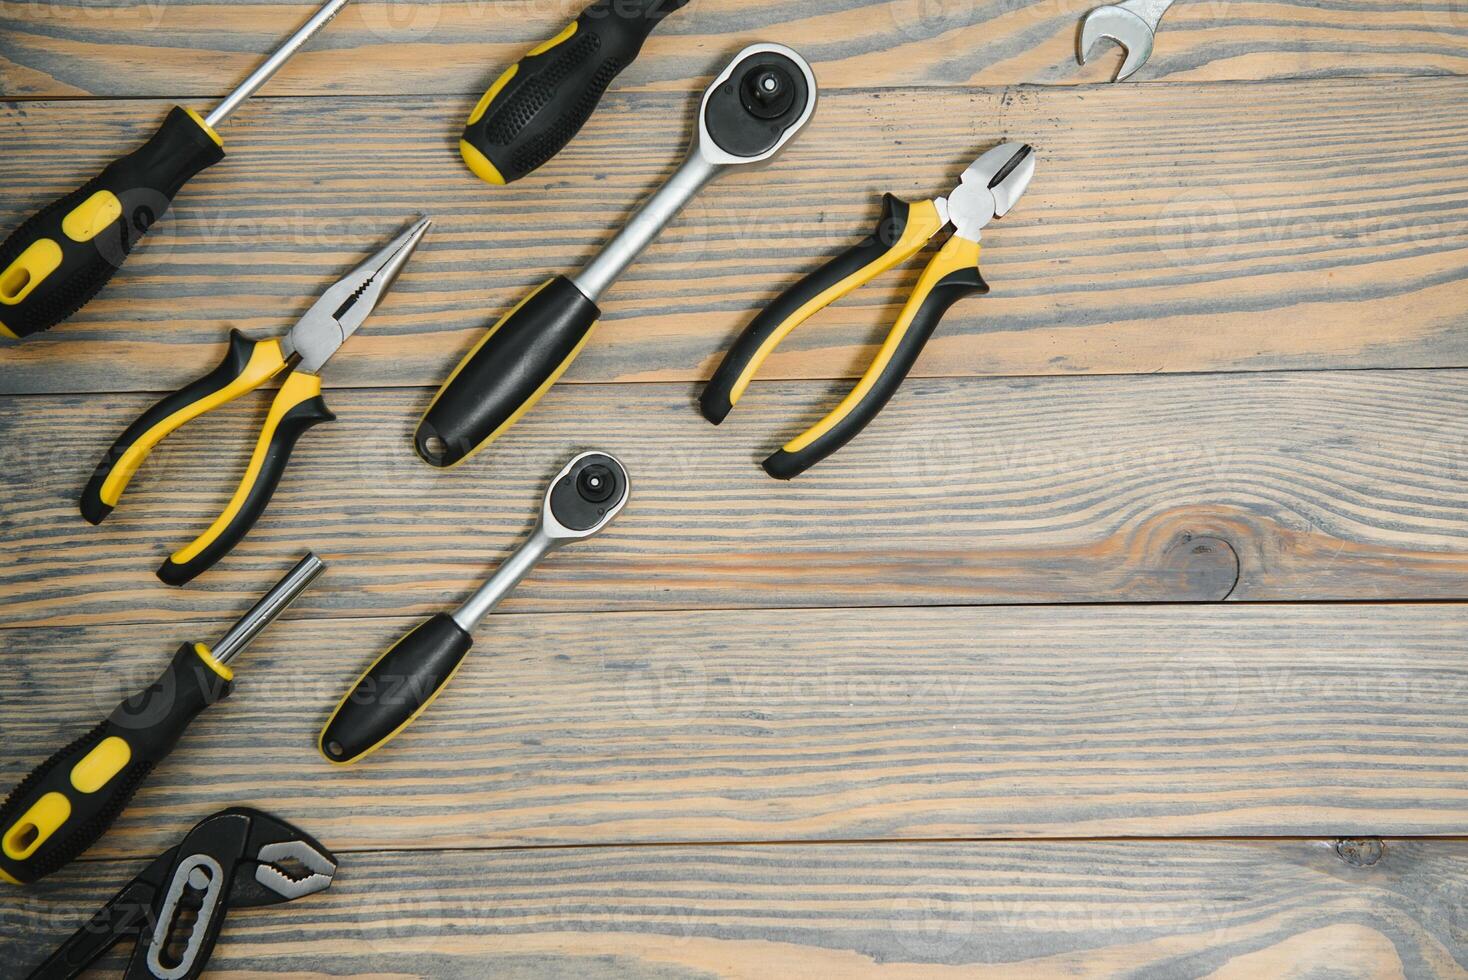 Various tools on wooden background photo